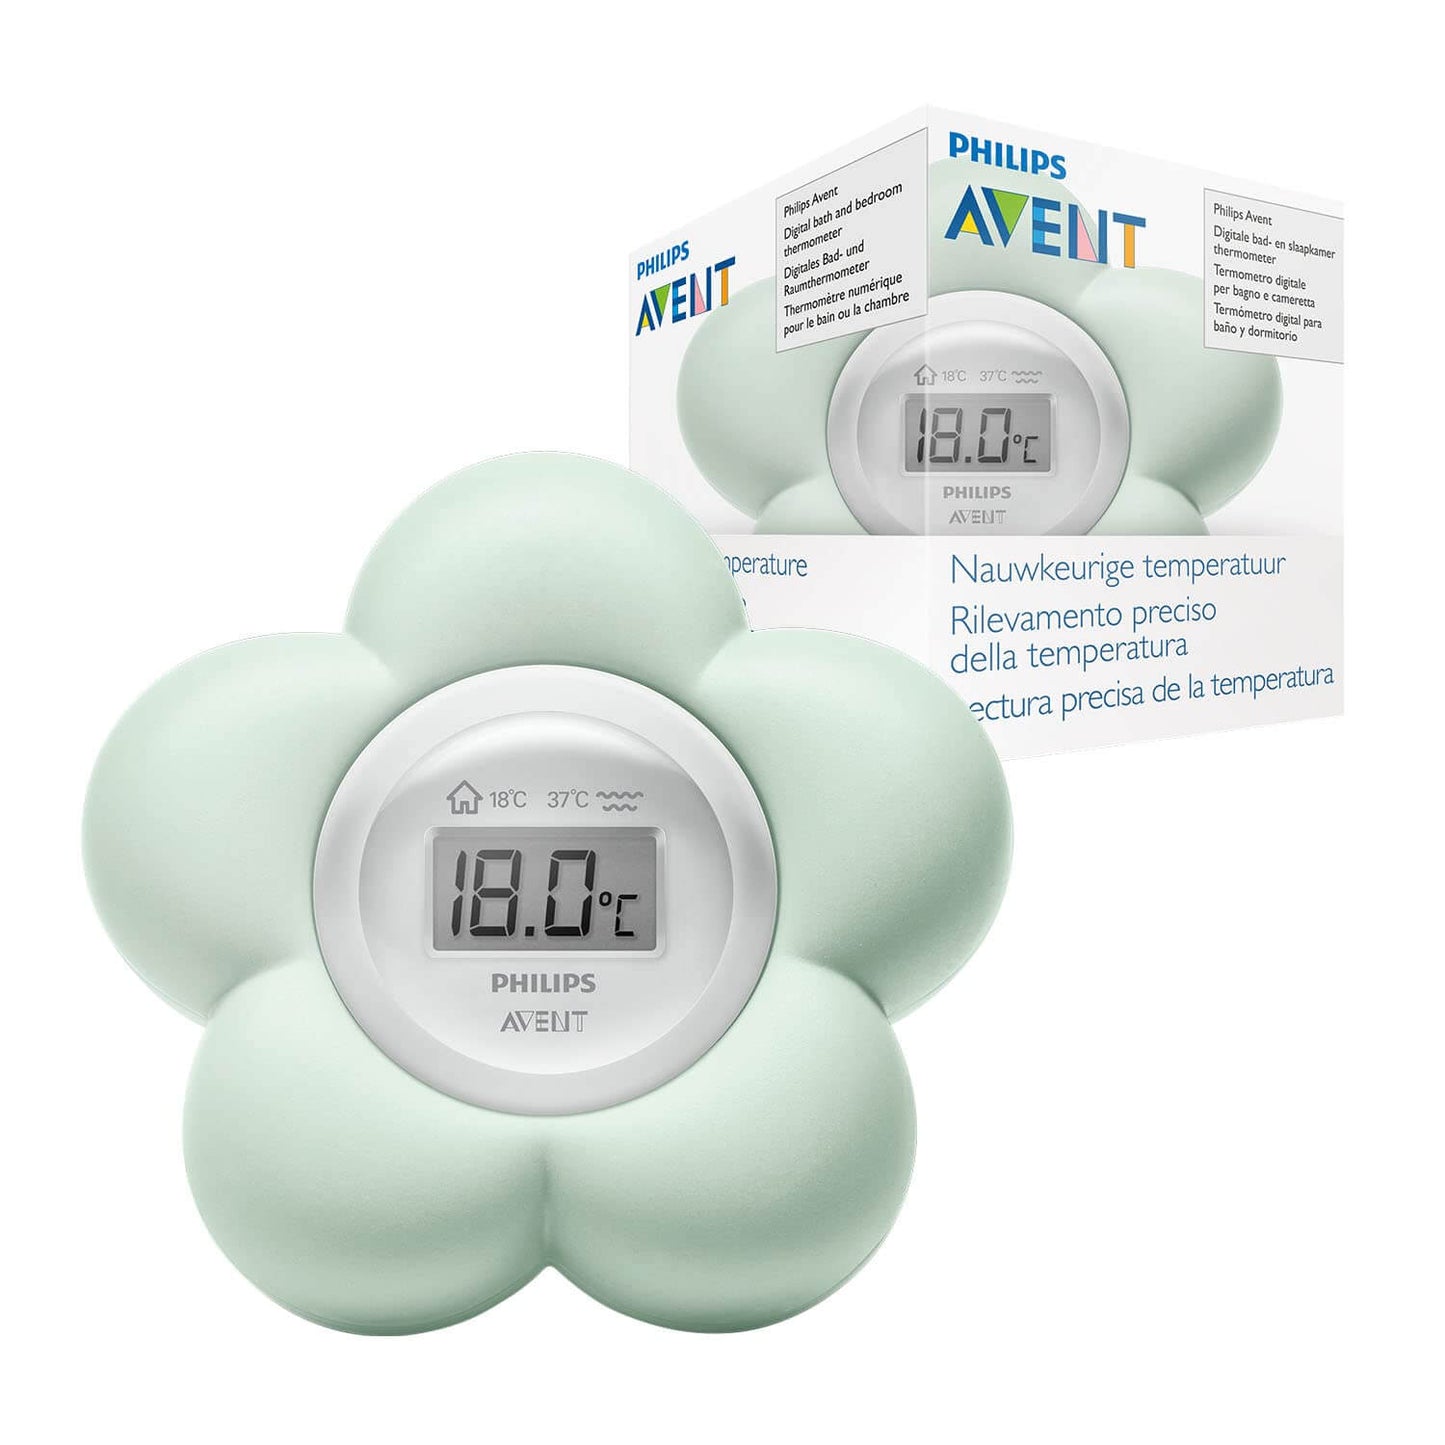 Philips Avent SCF480/00 Bath and Room Thermometer, Digital Display, Safe Measurement, Cute Design, Mint